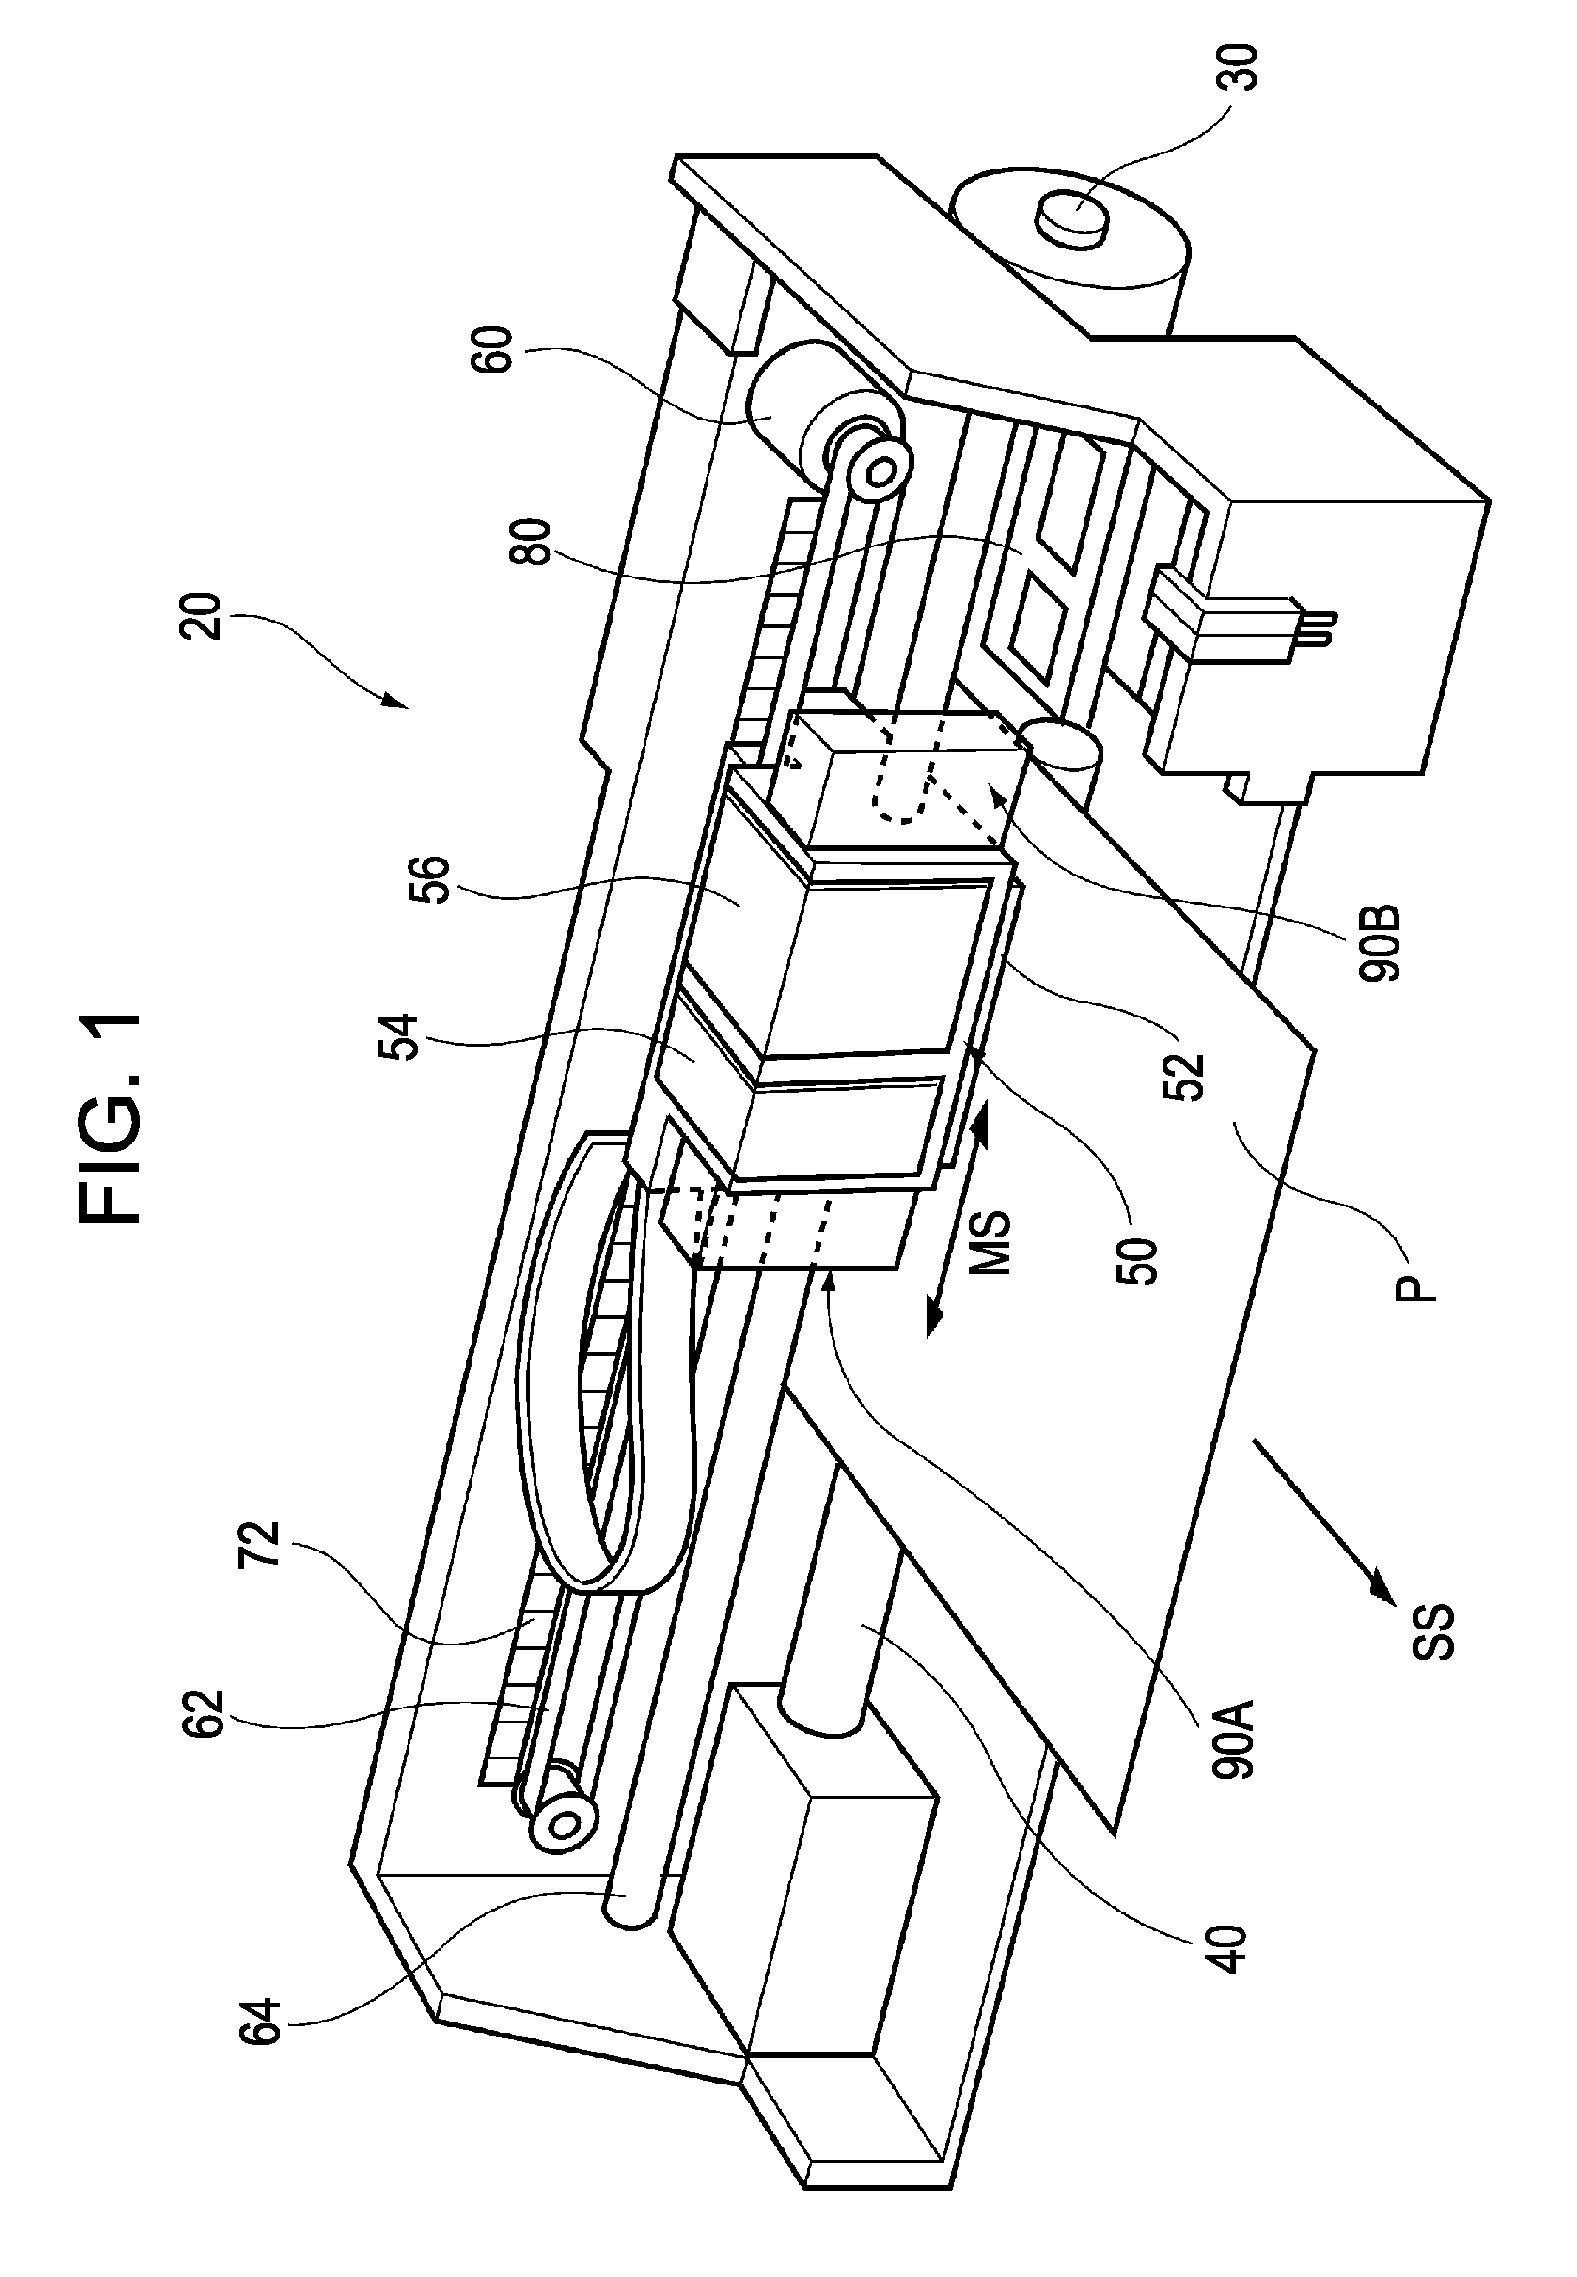 Ultraviolet ray irradiation device, recording apparatus using the ultraviolet ray irradiation device, and recording method